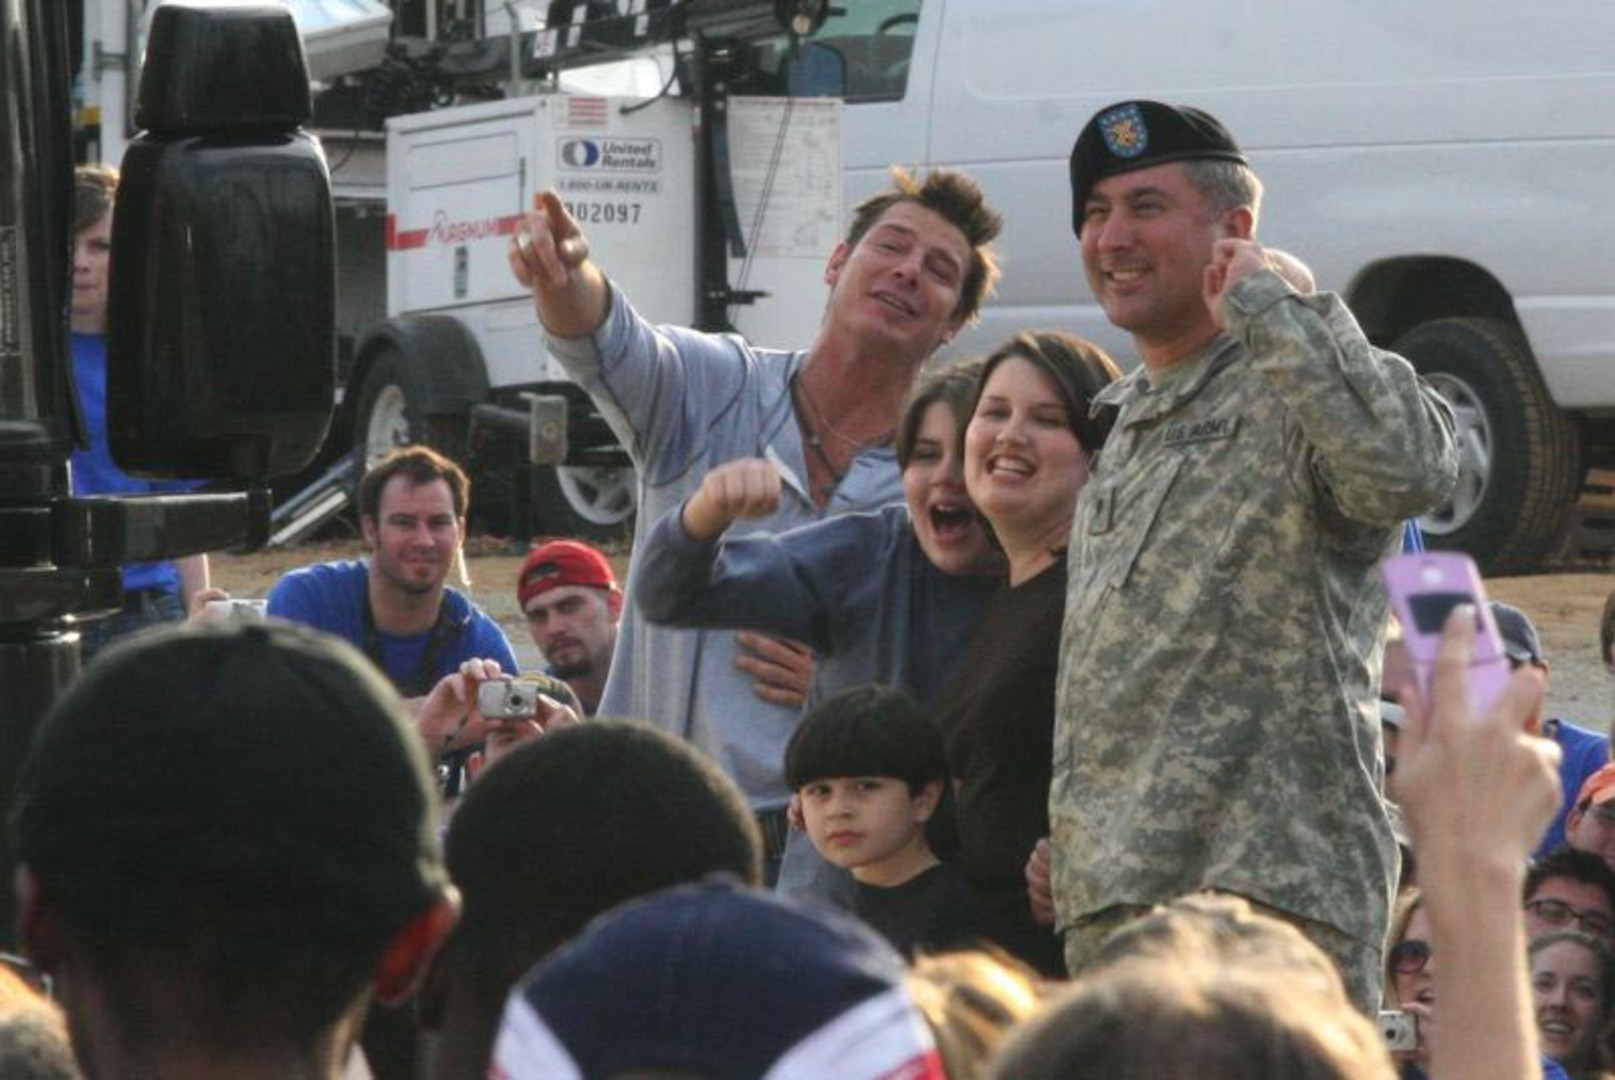 "Extreme Makeover: Home Edition" host Ty Pennington joins the family of Virginia National Guardsman Spc. Michael Lucas in cheering "Move that bus!," allowing the family their first glimpse of their totally-renovated home in Rice, Va., Dec. 10. Lucas is currently deployed to Iraq with Company C, 3rd Battalion, 116th Infantry, Virginia Army National Guard.